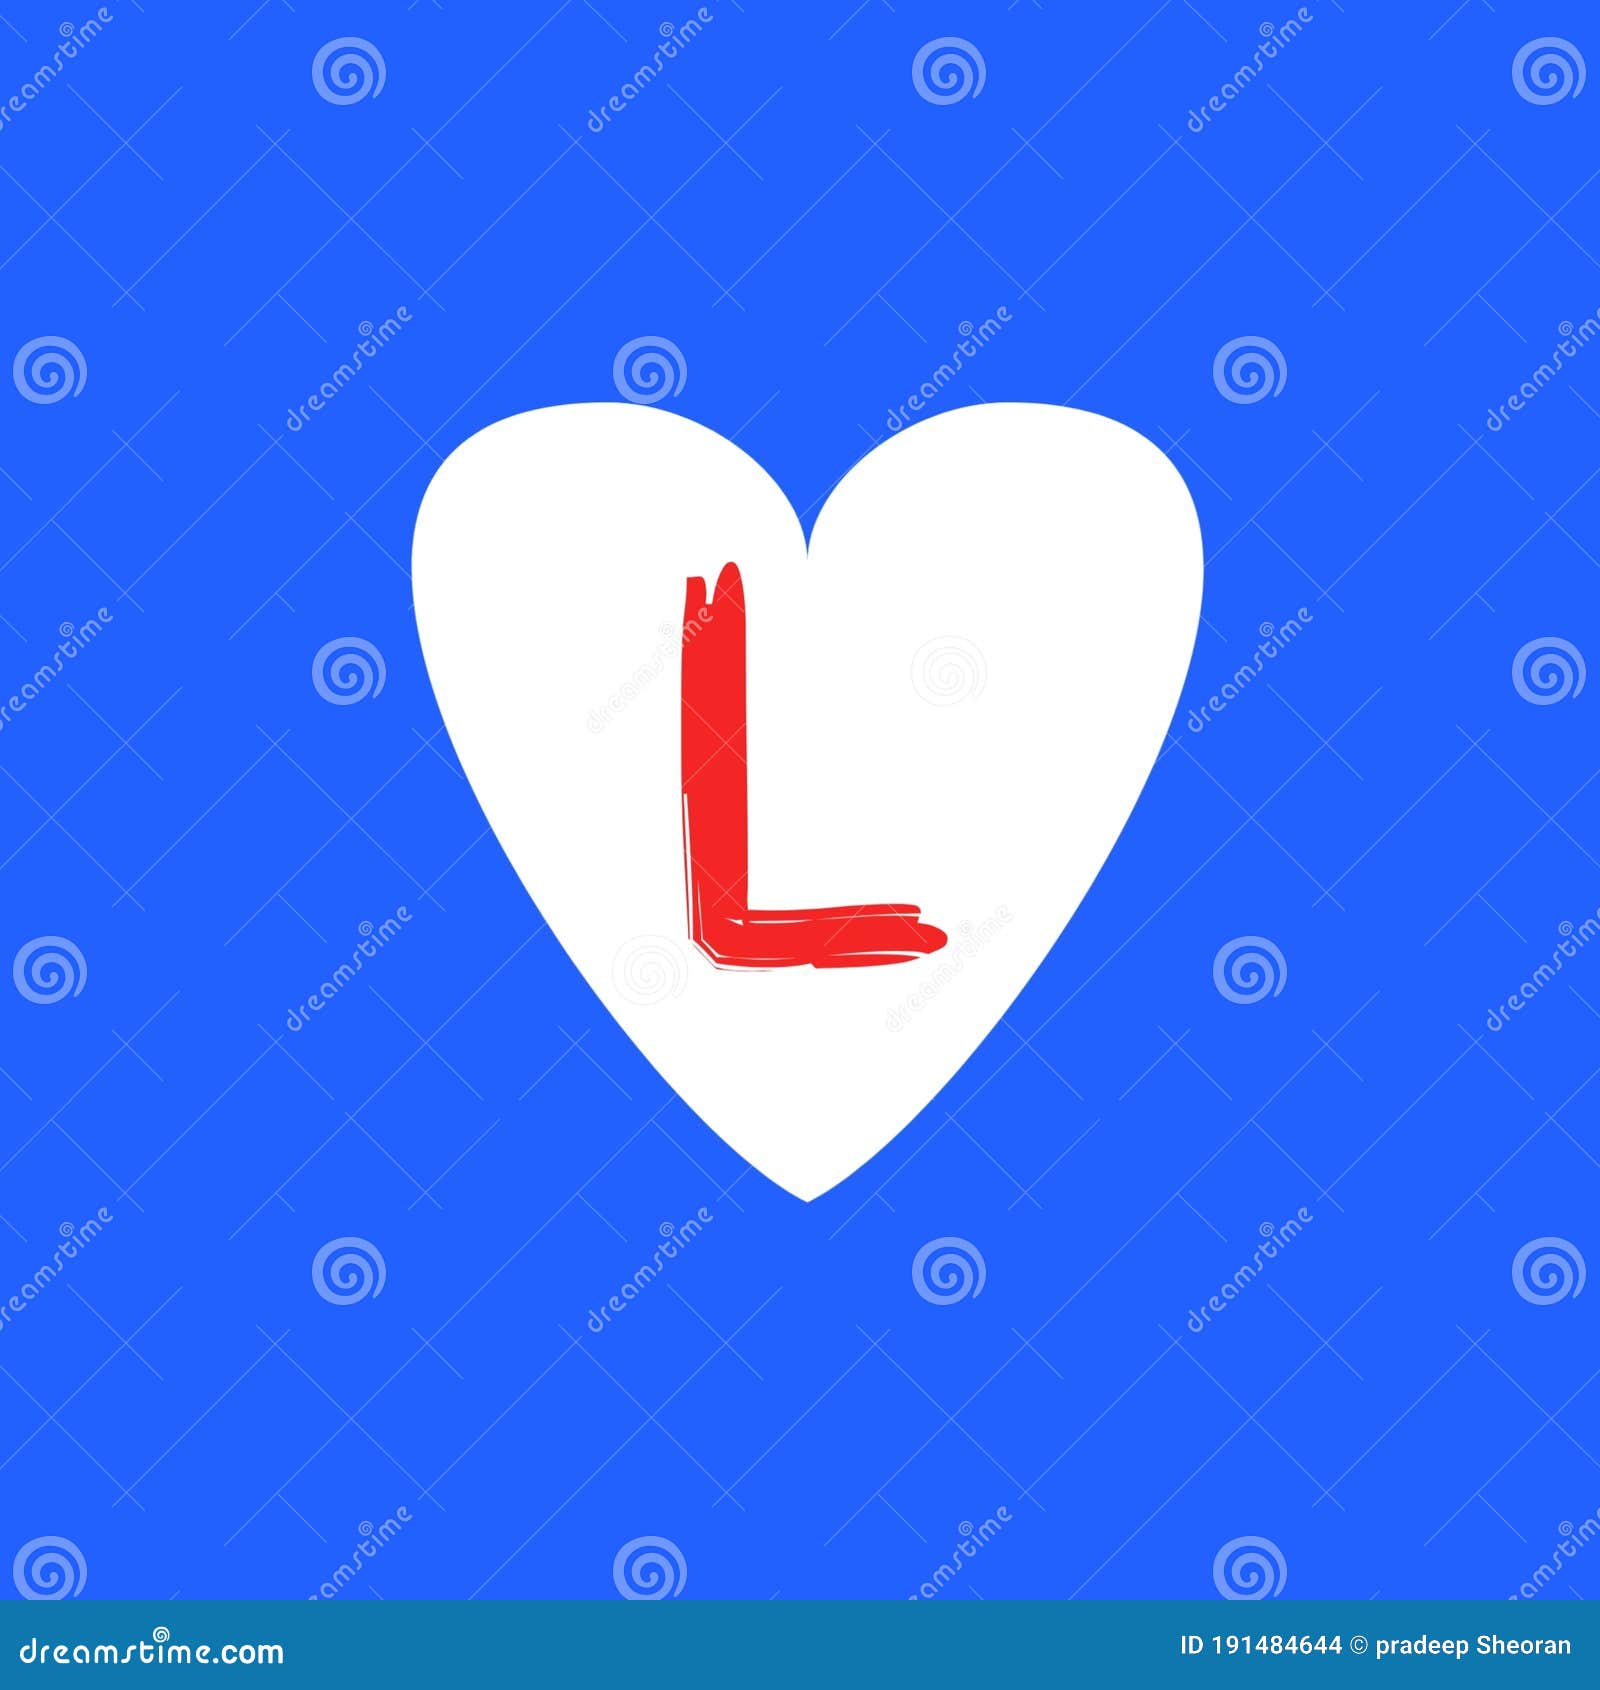 Stylish Texture Image of Red L Alphabet on White Heart with Blue Background  Wallpaper Stock Illustration - Illustration of white, stylish: 191484644